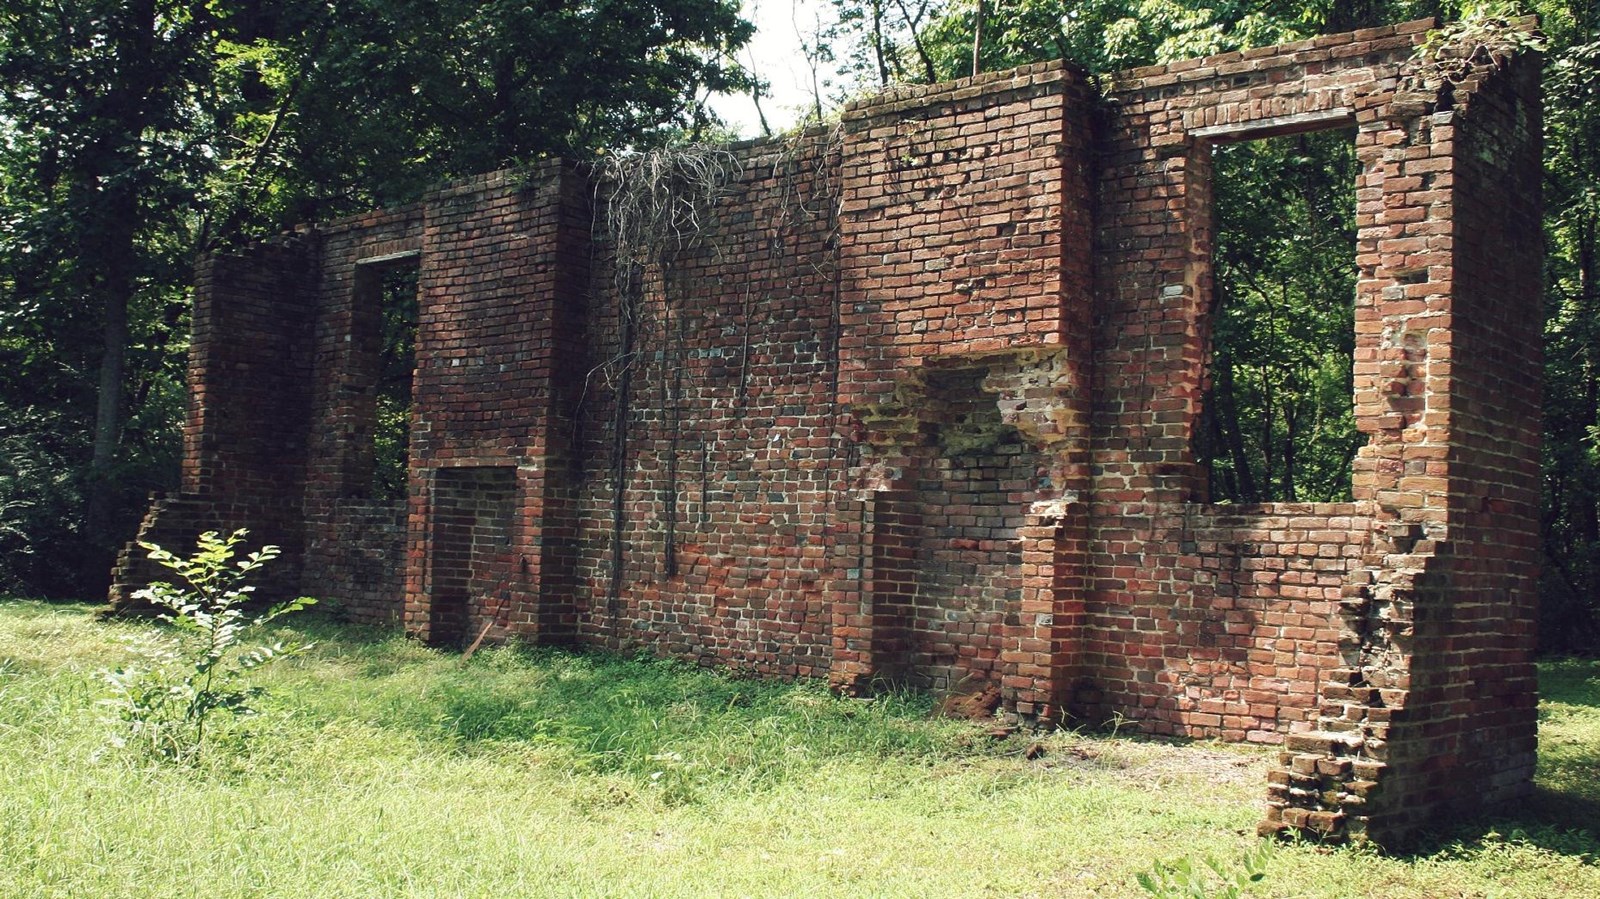 The ruins, just a brick wall, stands amongst green trees. 